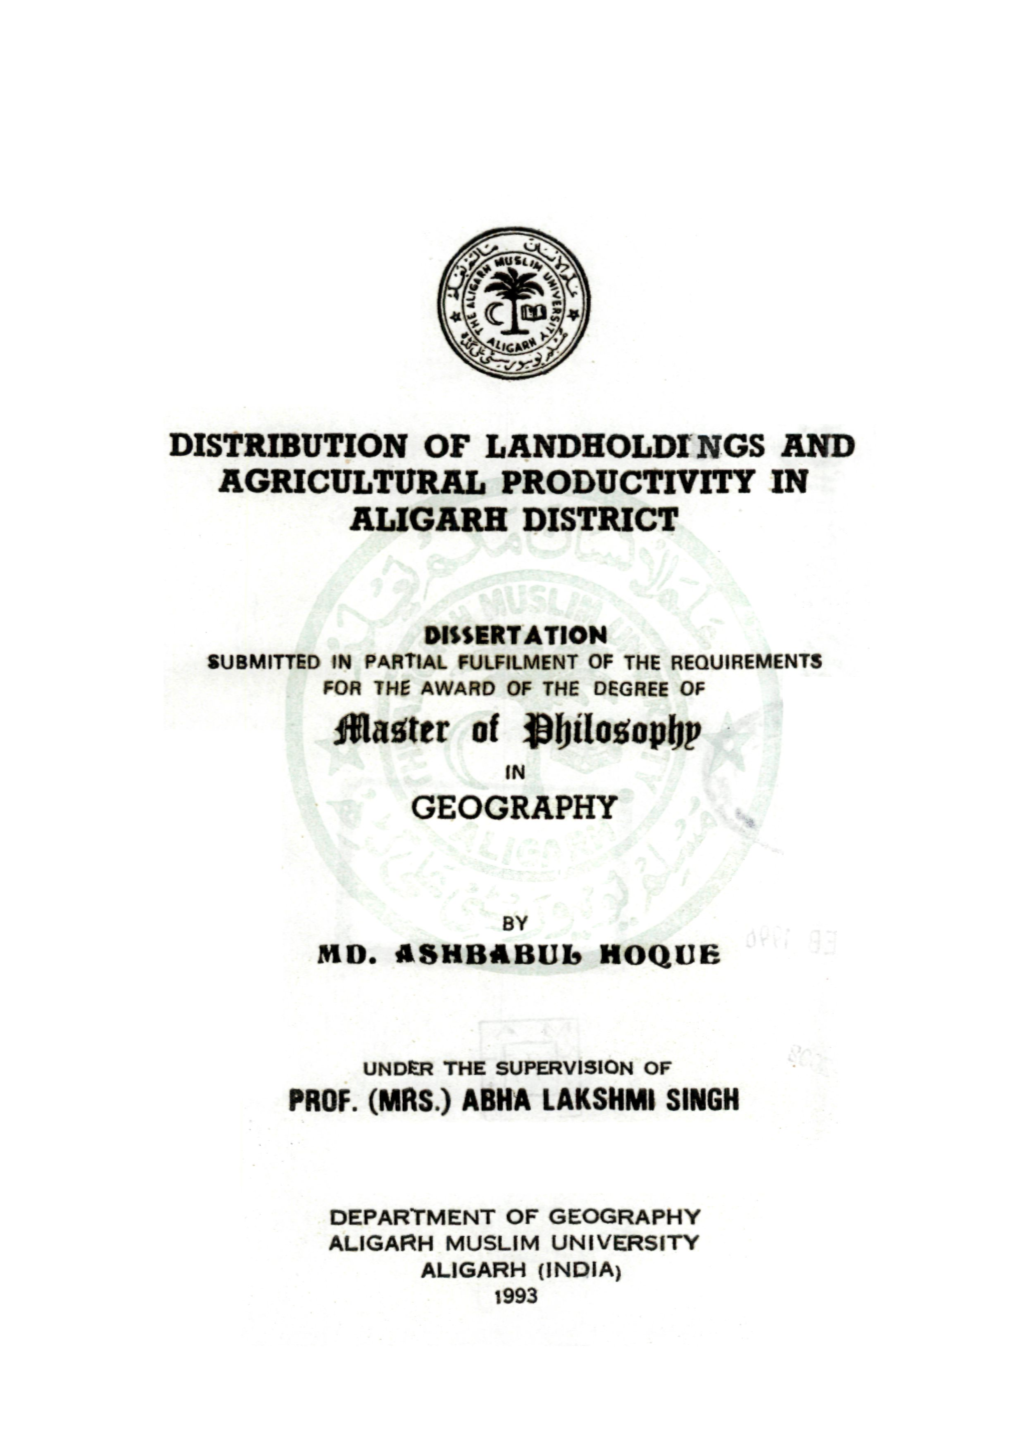 Distribution of Landholdings and Agricultural Productivity in Aligarh District